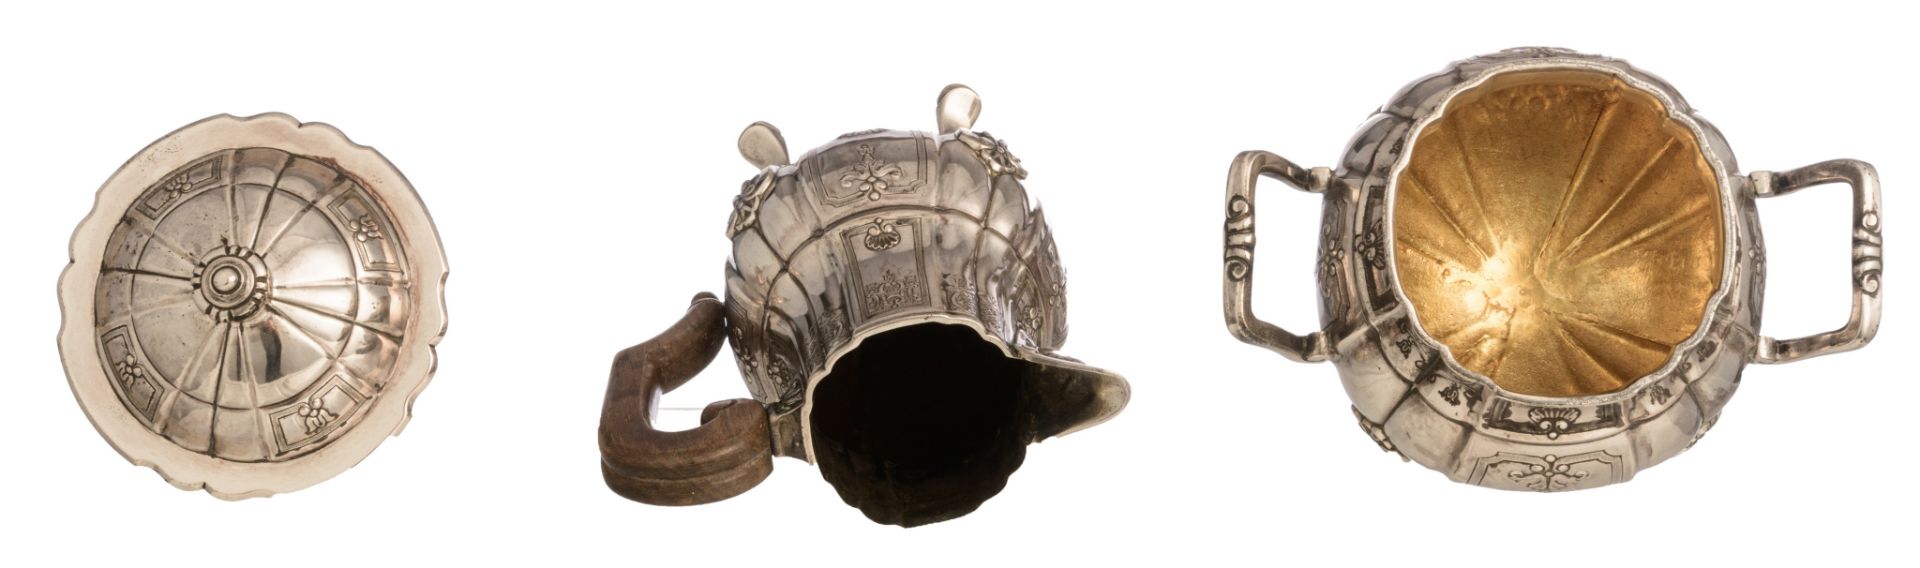 A four-part Belgian silver coffee and tea set, H 15 - 29 cm / total weight c. 4.290 g - Image 9 of 13